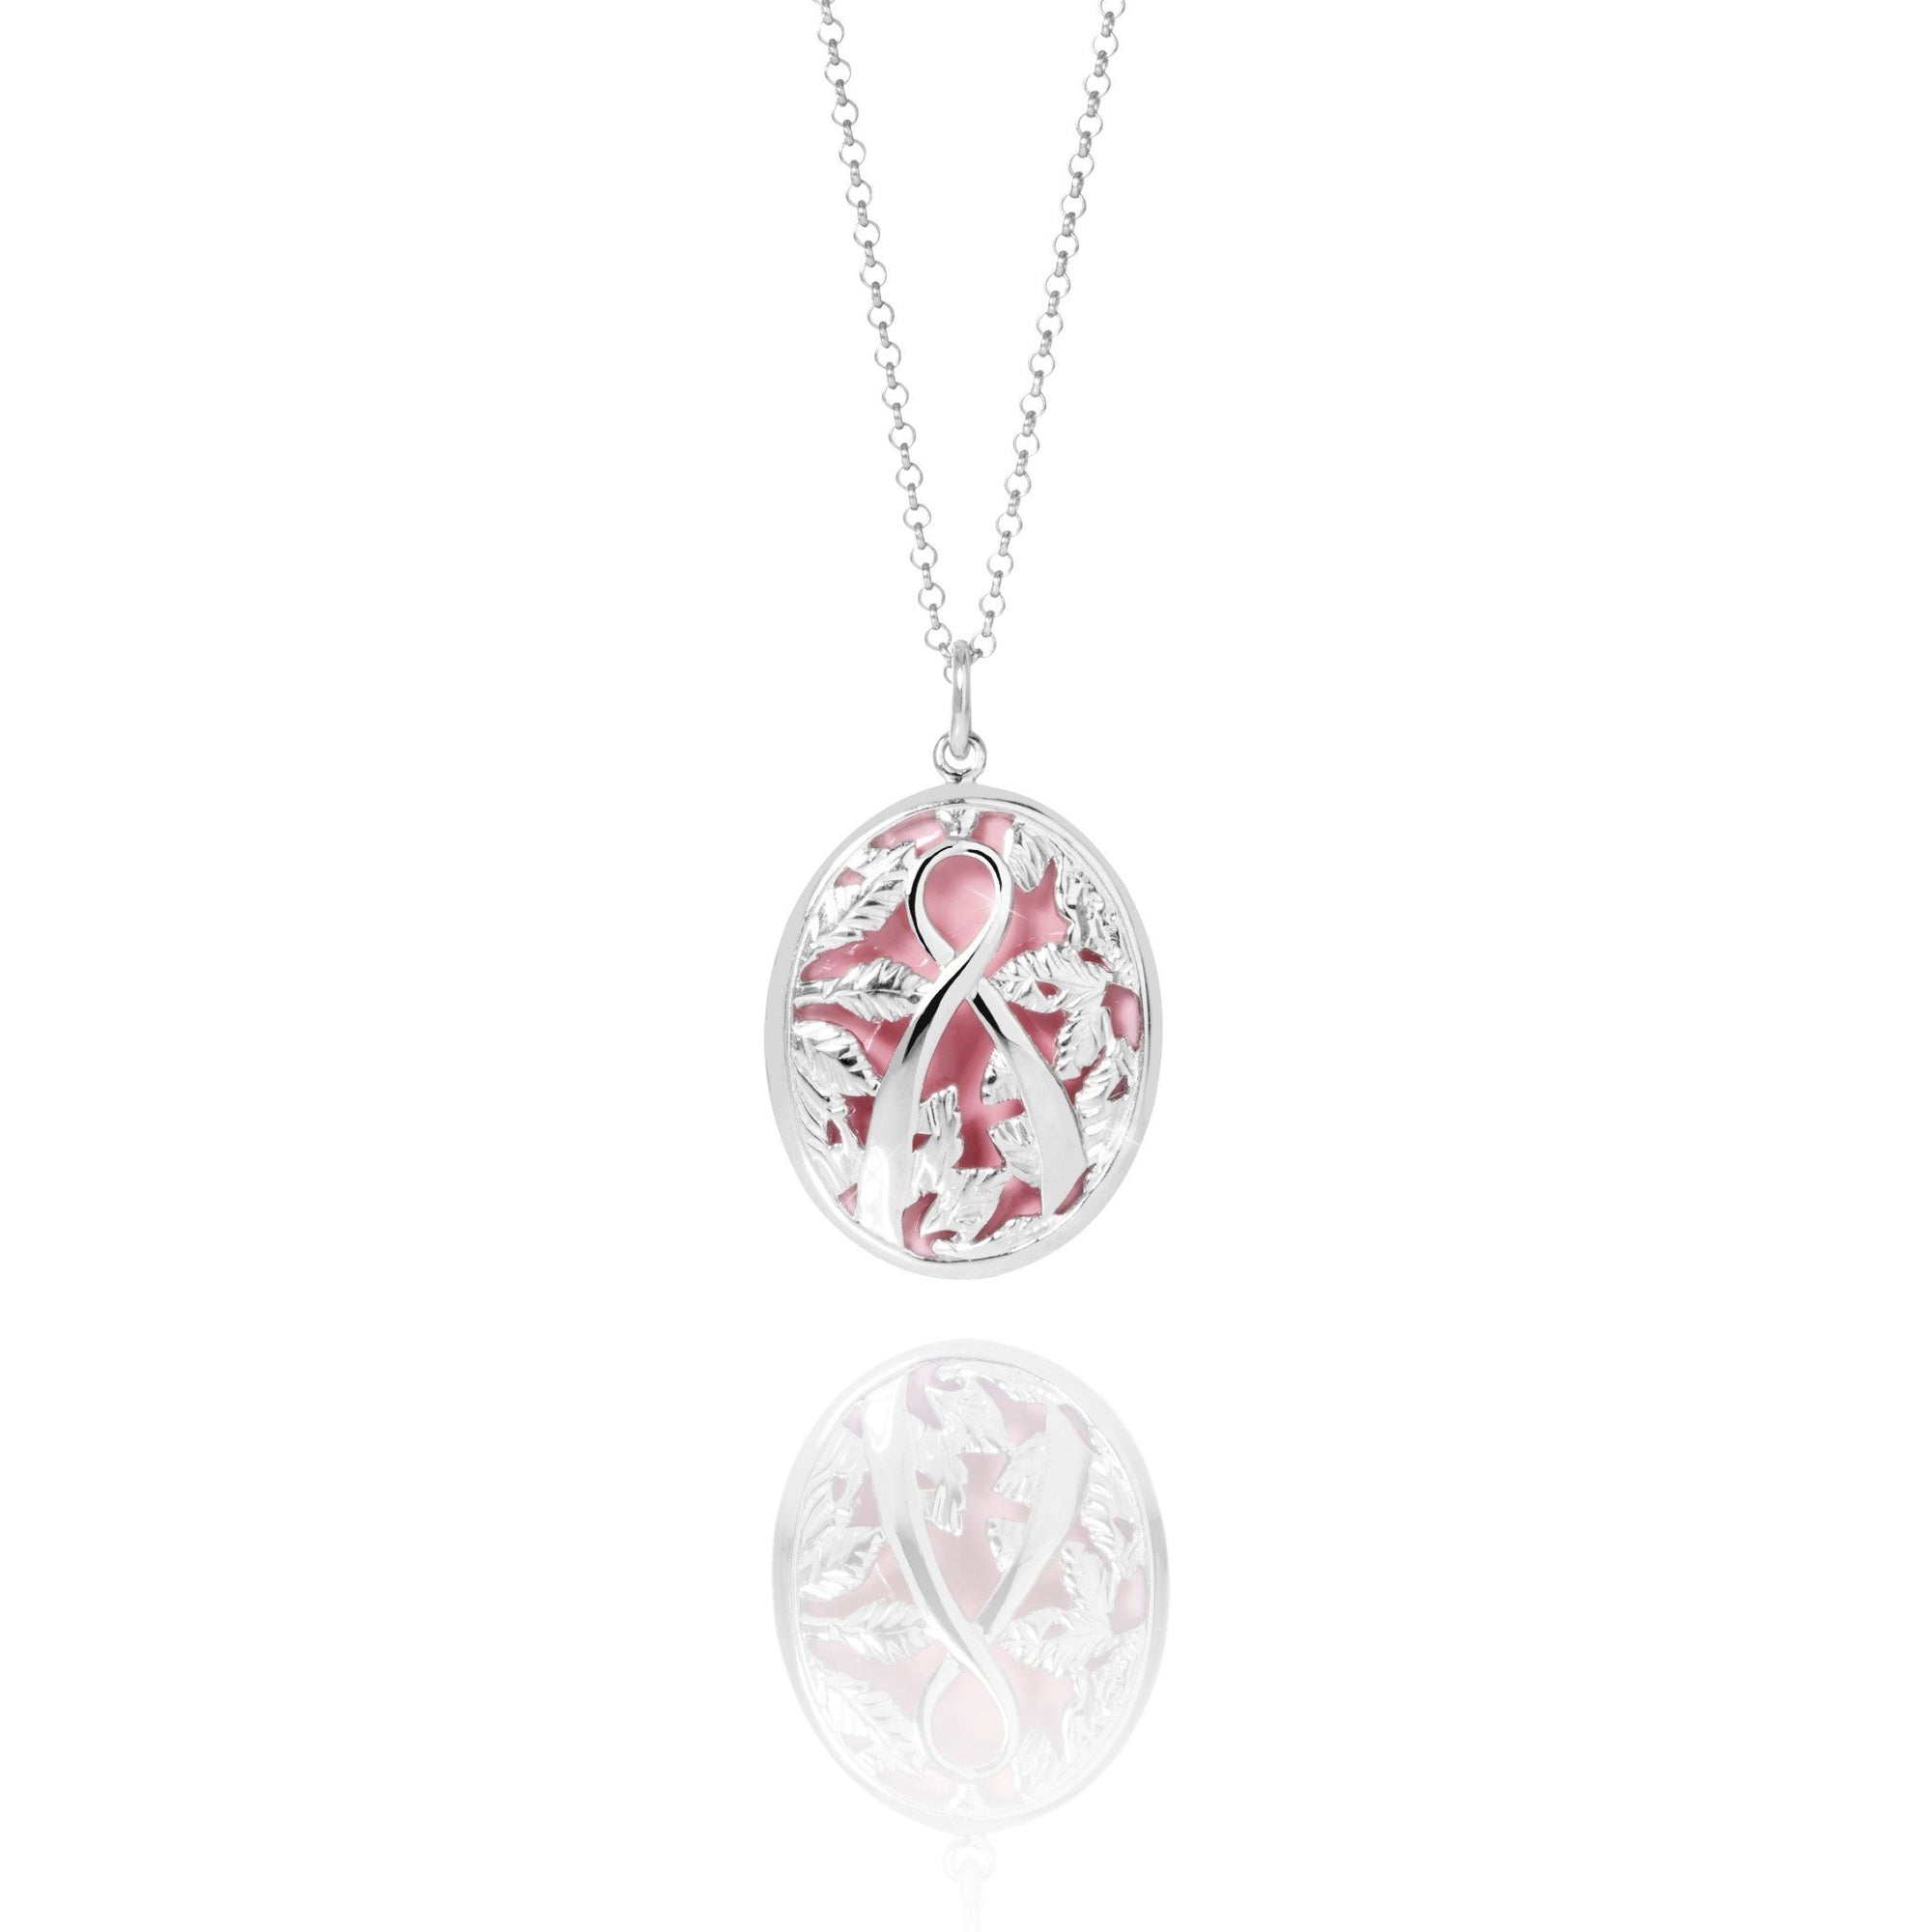 aurum x bleika slaufan 2020 limited-edition necklace for breast cancer research